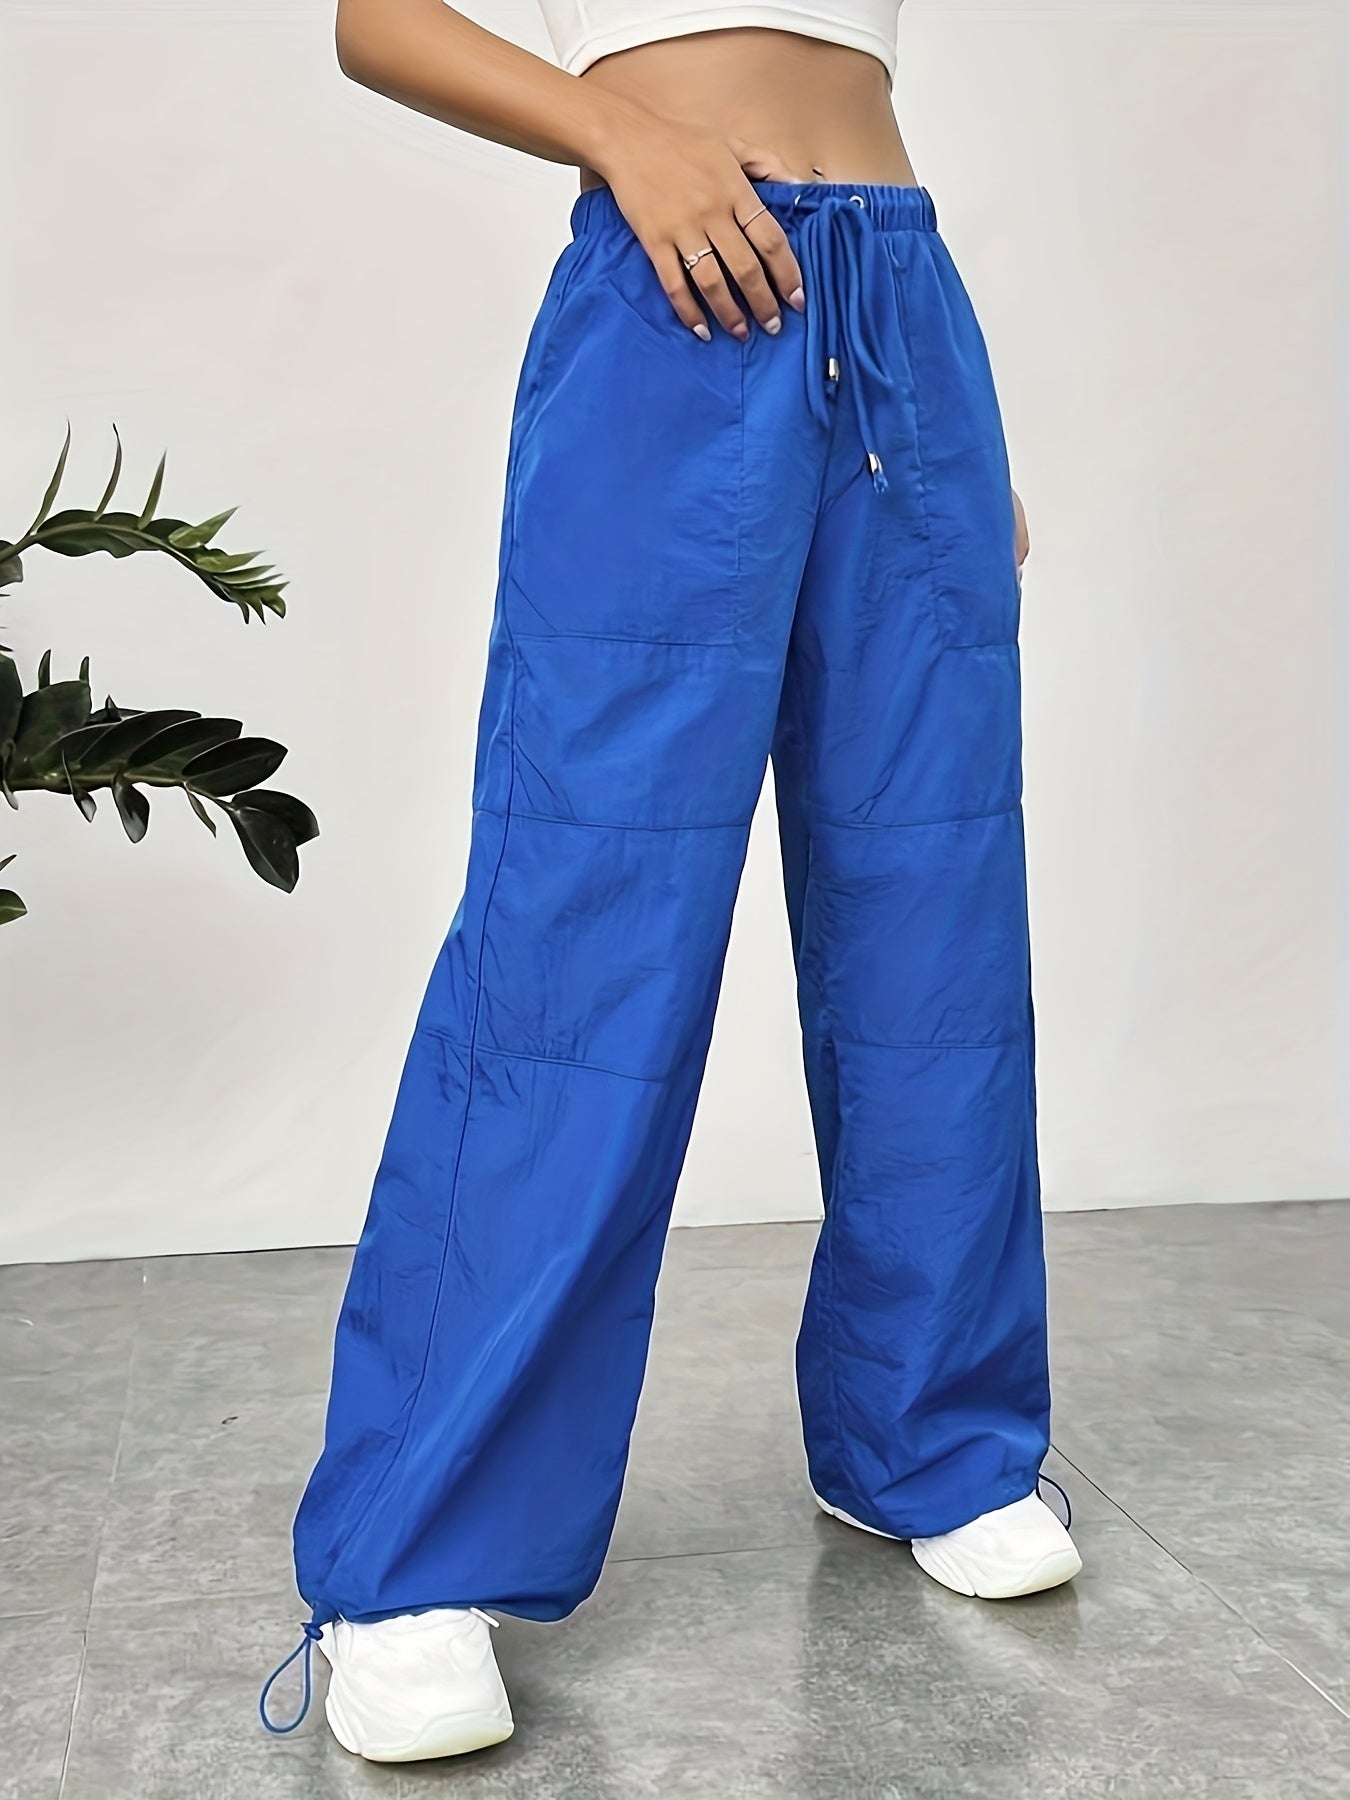 vlovelaw Solid Color Drawstring Cargo Pants, Y2K Slant Pockets Pants For Spring & Fall, Women's Clothing